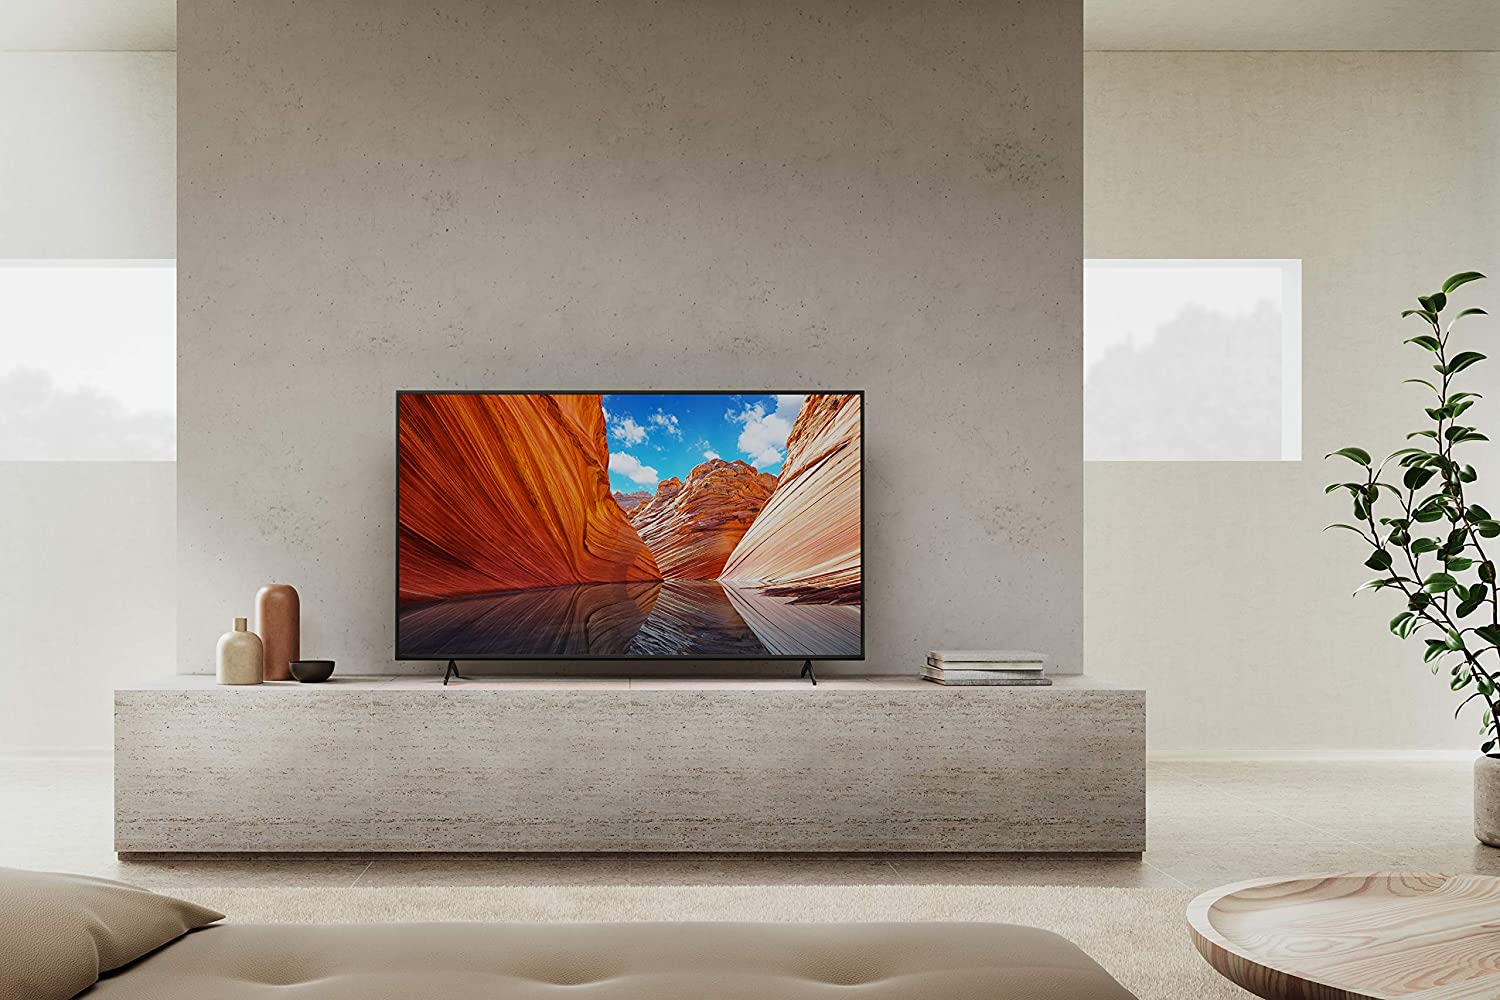 Sony X80J 50 Inch TV: 4K Ultra HD LED Smart Google TV with Dolby Vision HDR and Alexa Compatibility 